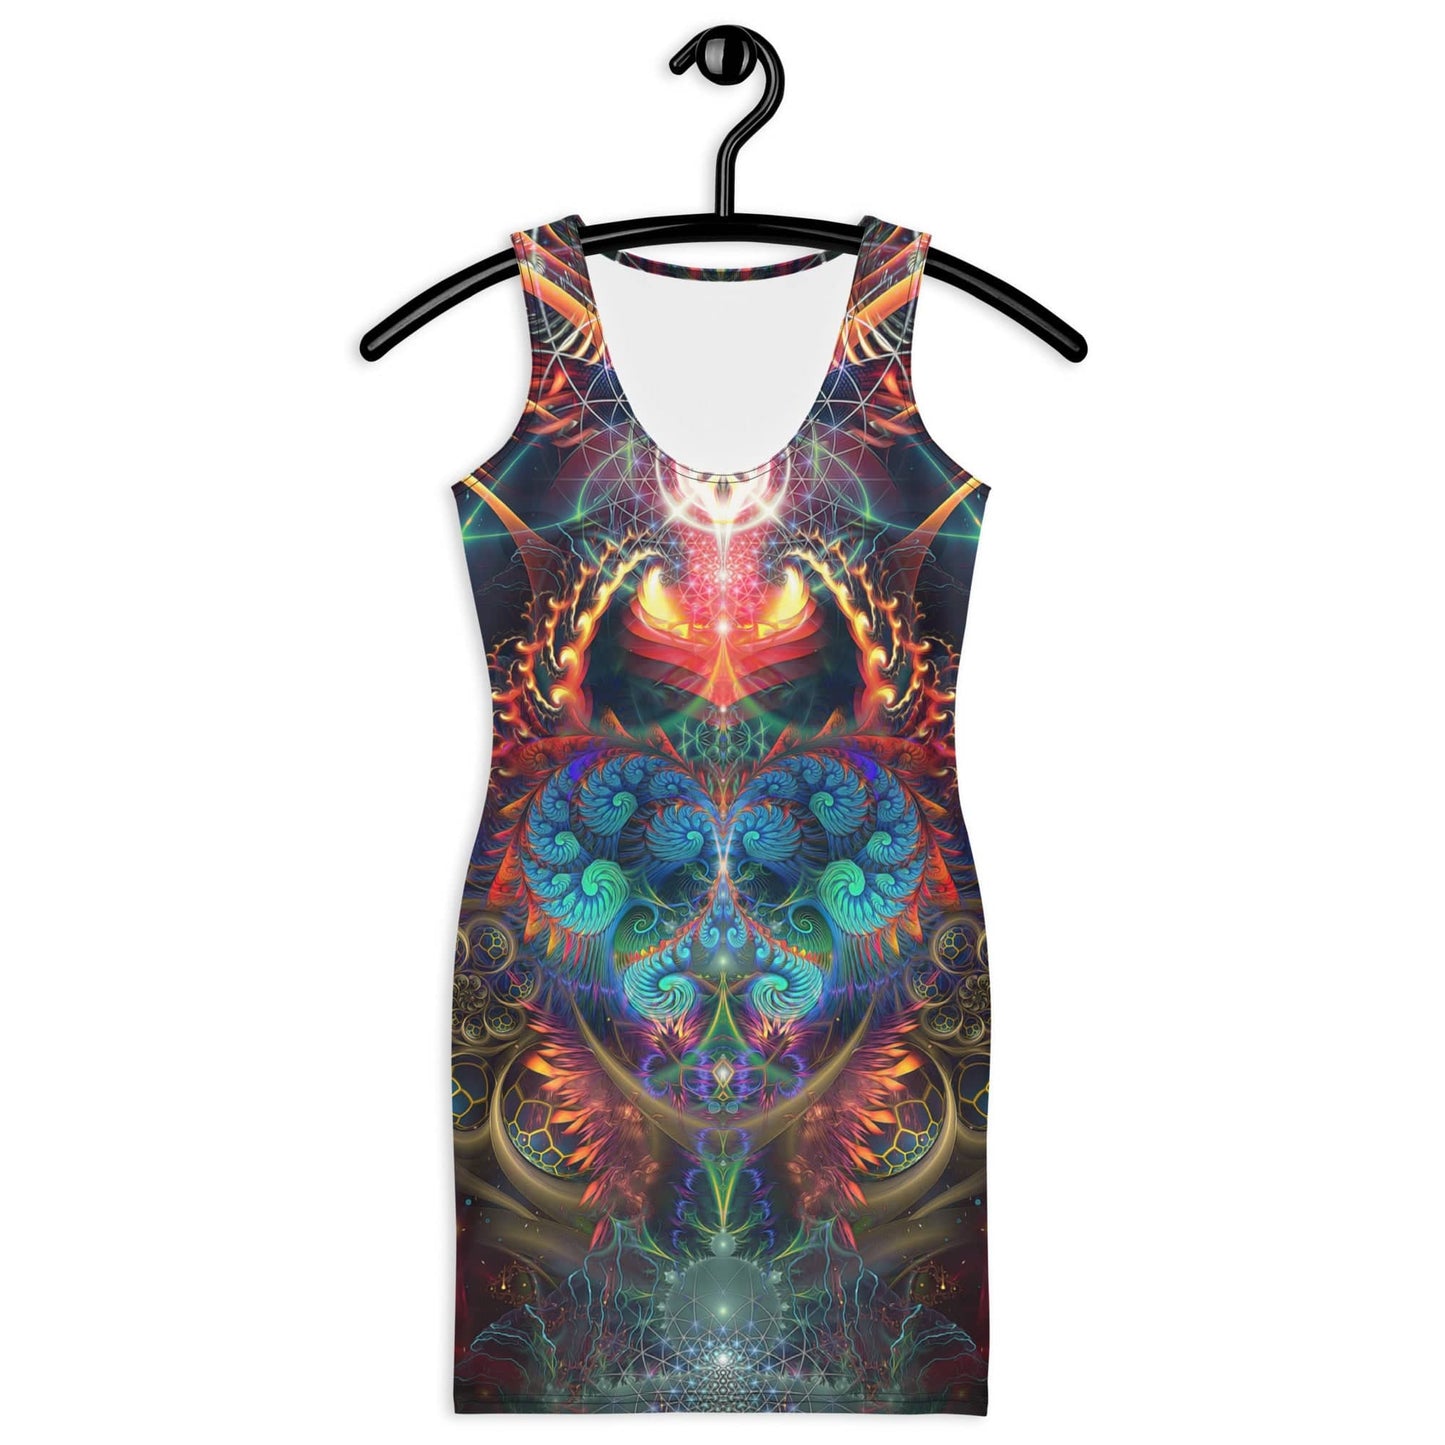 "Stimulous (V2)" Bodycon FITTED DRESS